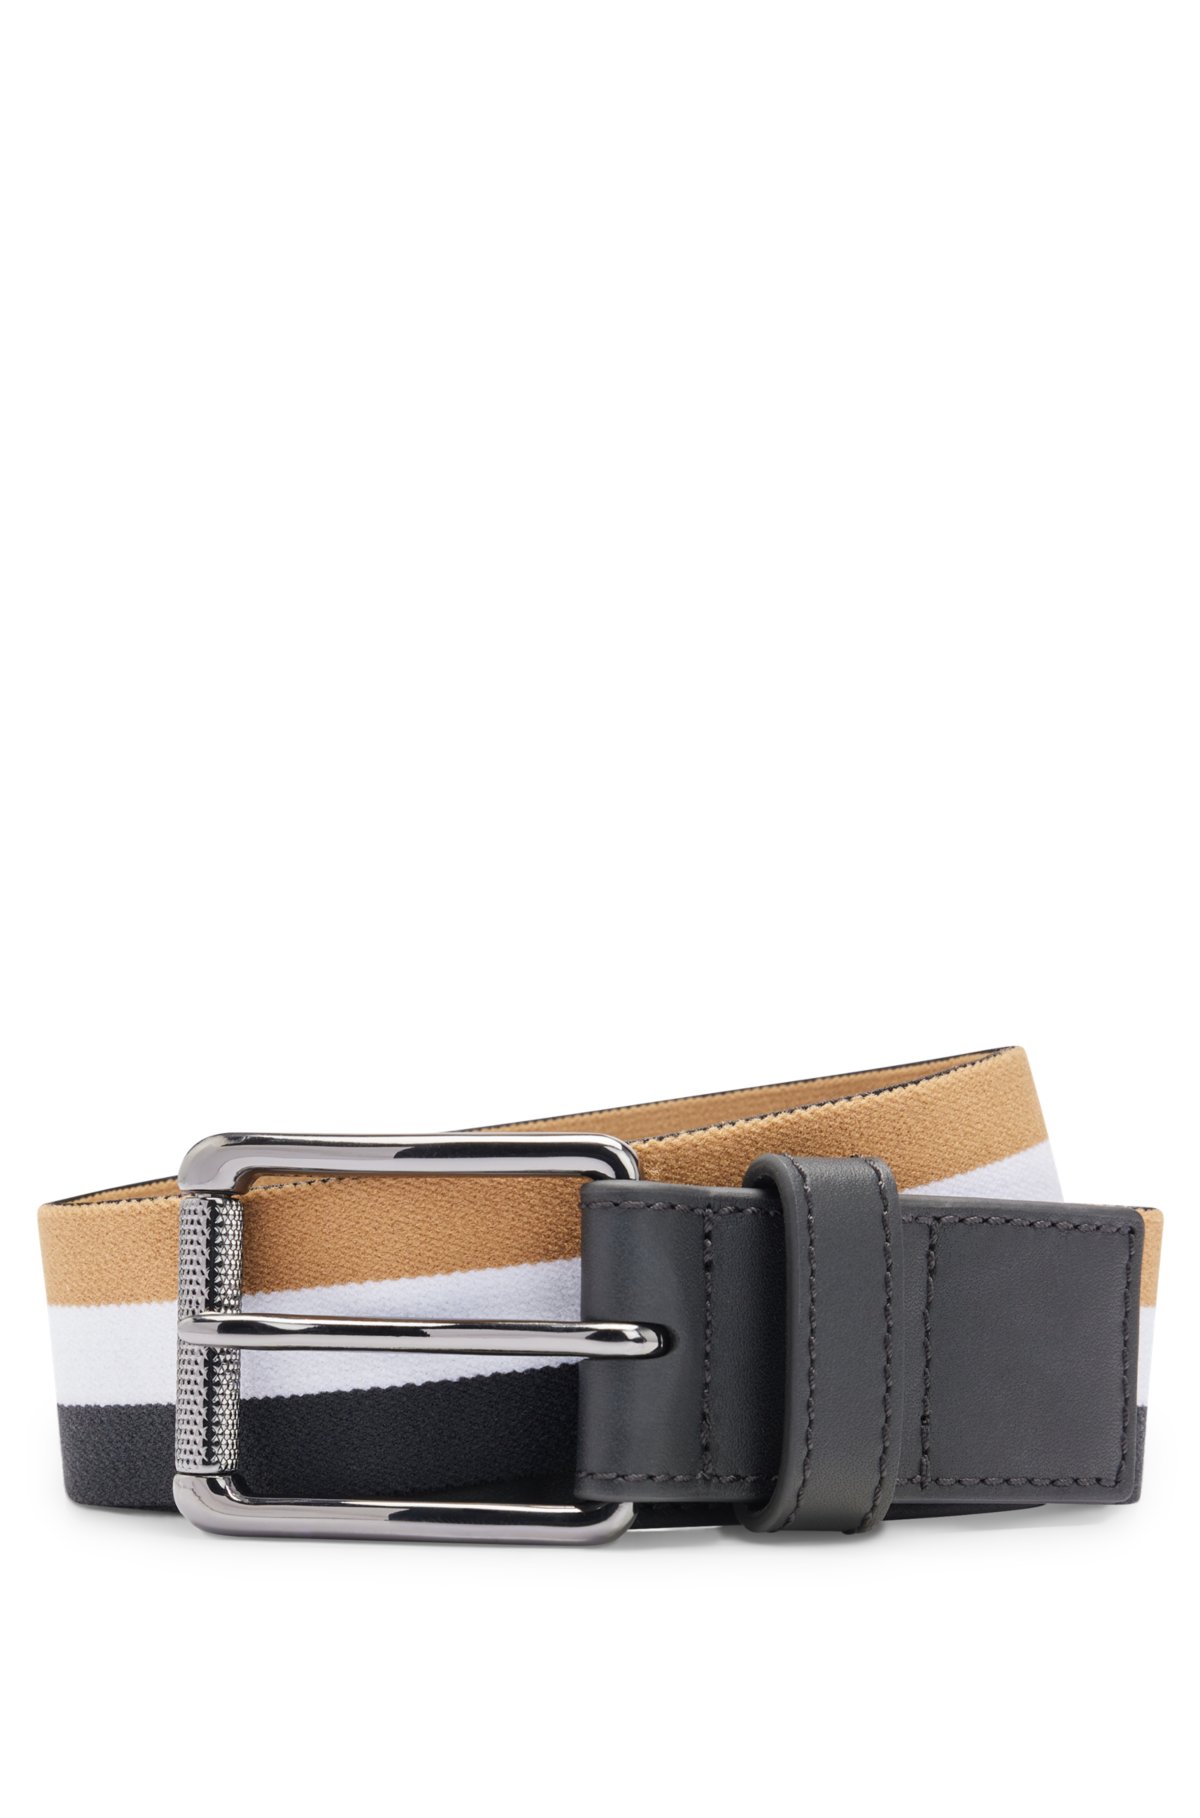 Signature-stripe belt in stretch cotton with leather trims, Black Patterned